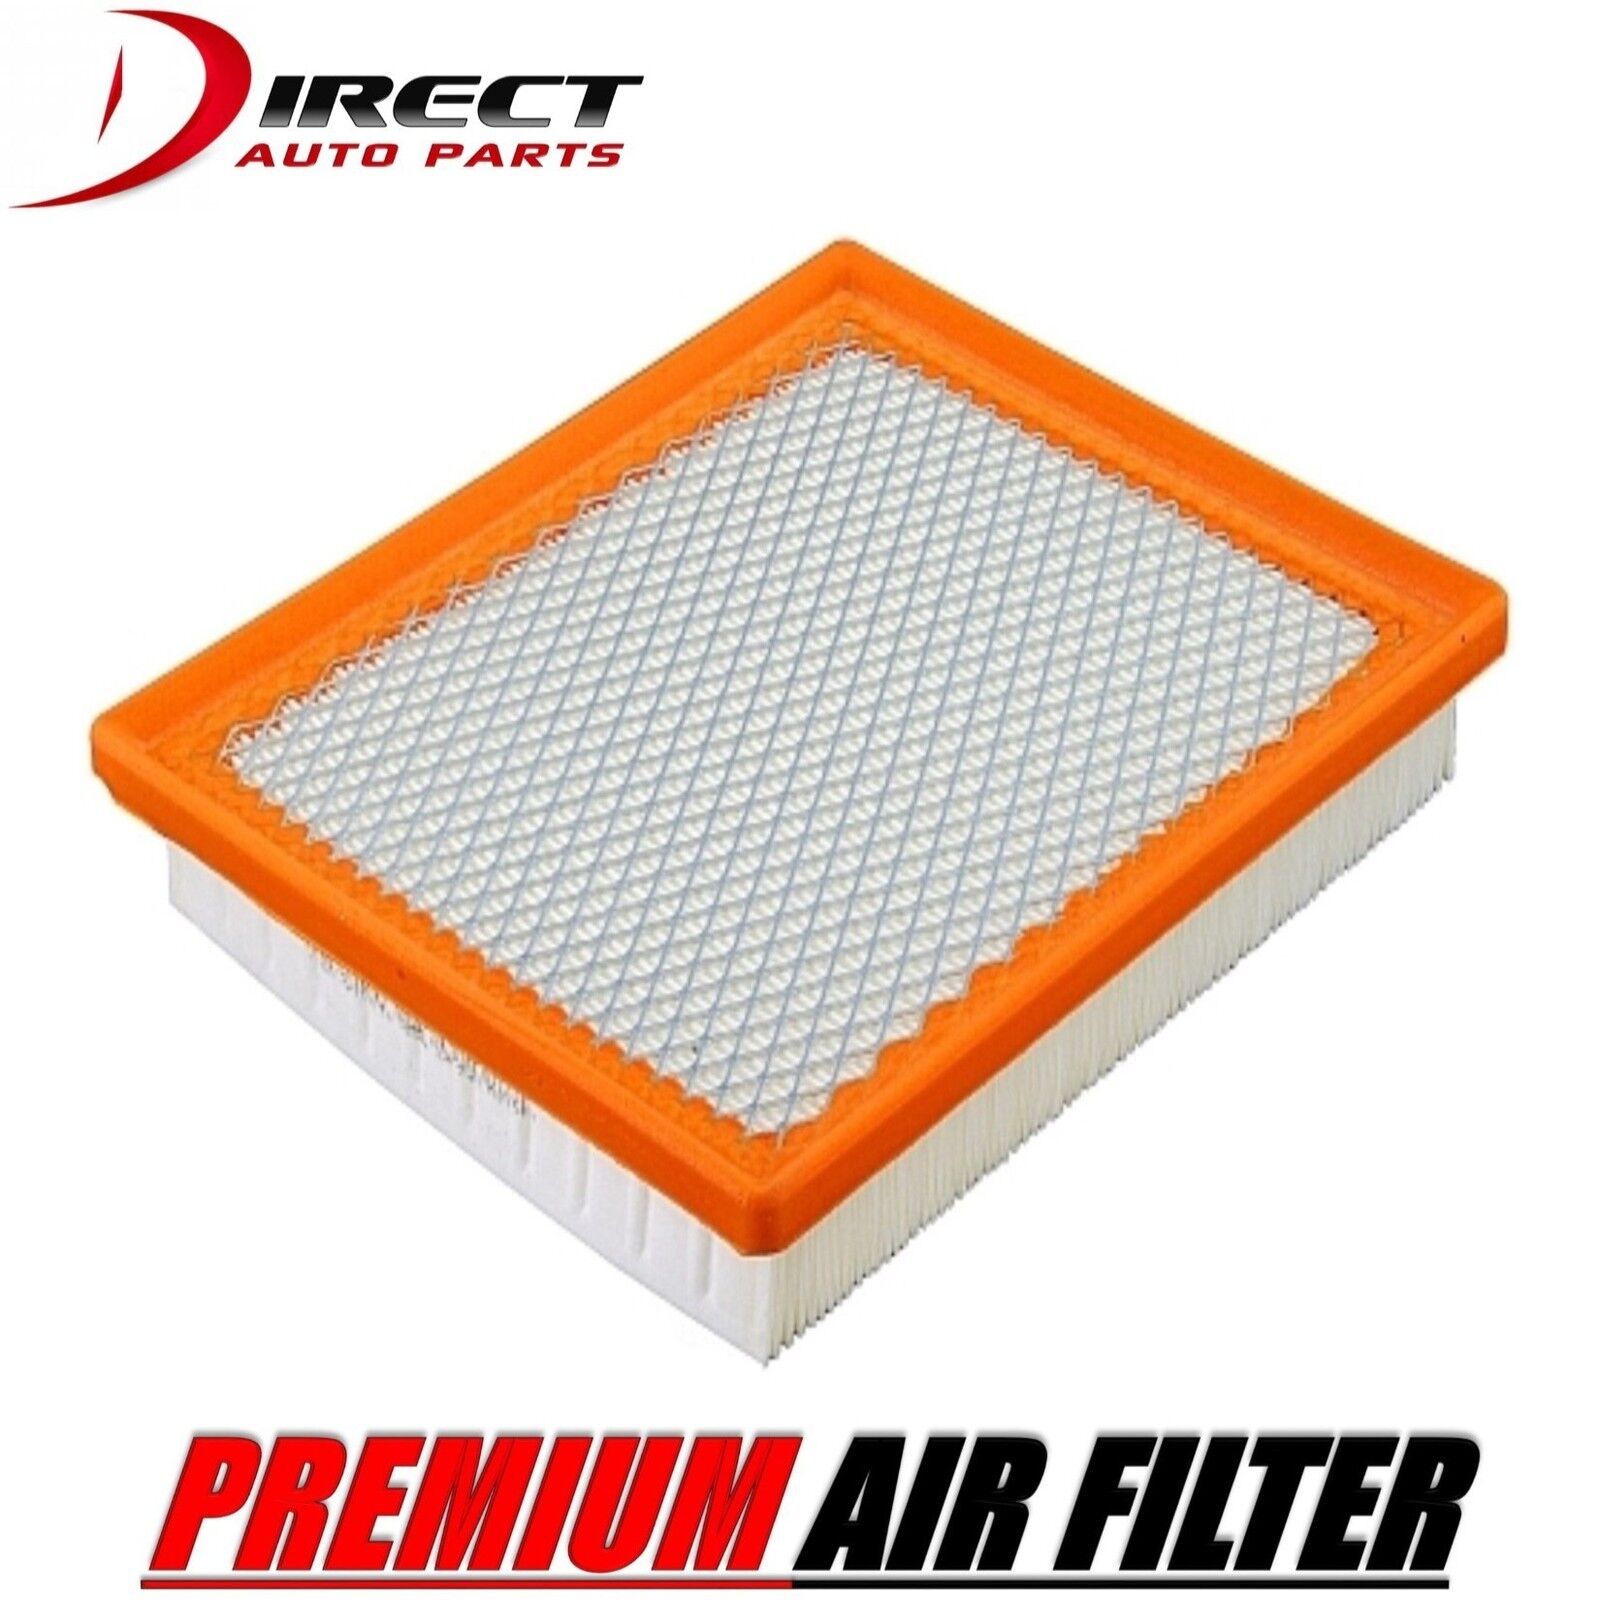 AIR FILTER FOR TOYOTA PRIUS 1.8L ENGINE 2015 - 2010